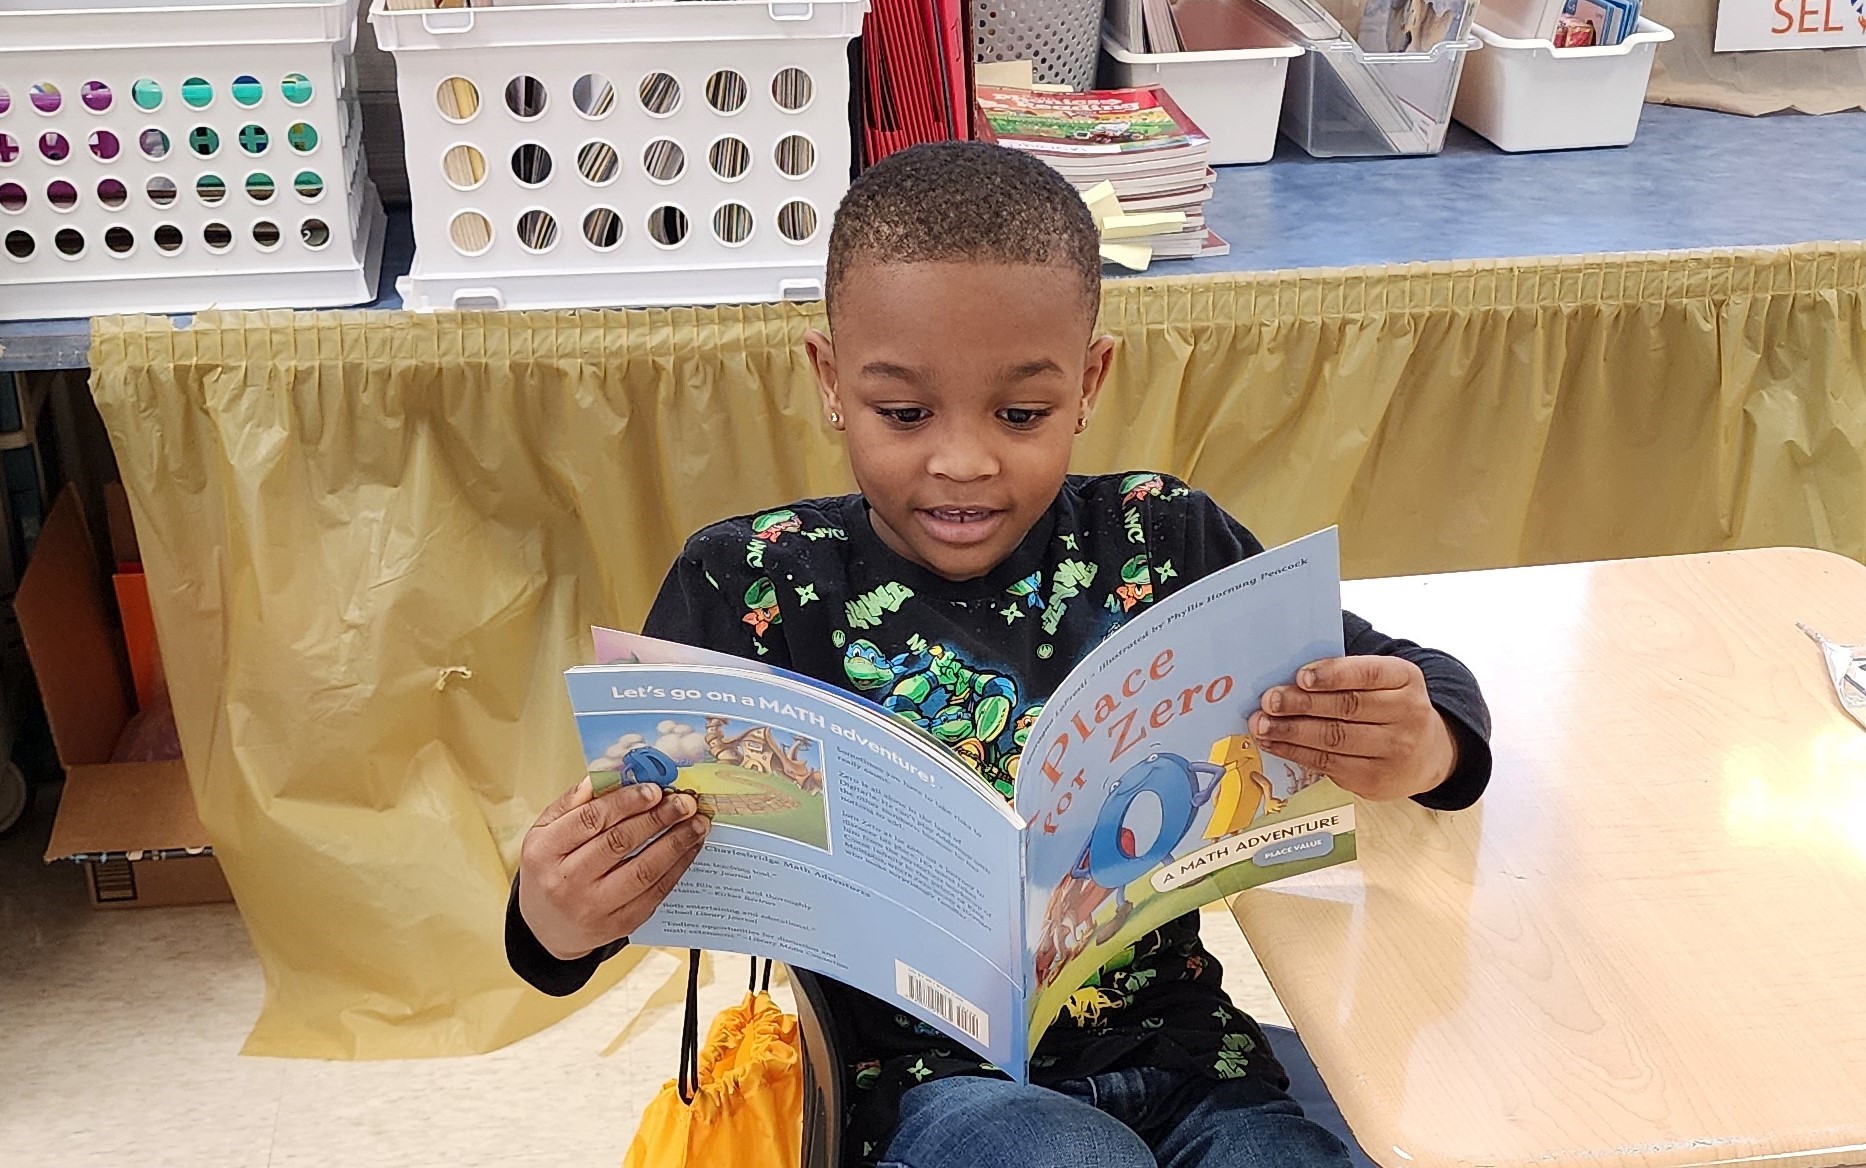 GO READERS! WCS’ Reading Raider program gets strong start as students, staff & families embrace reading at school and in the home